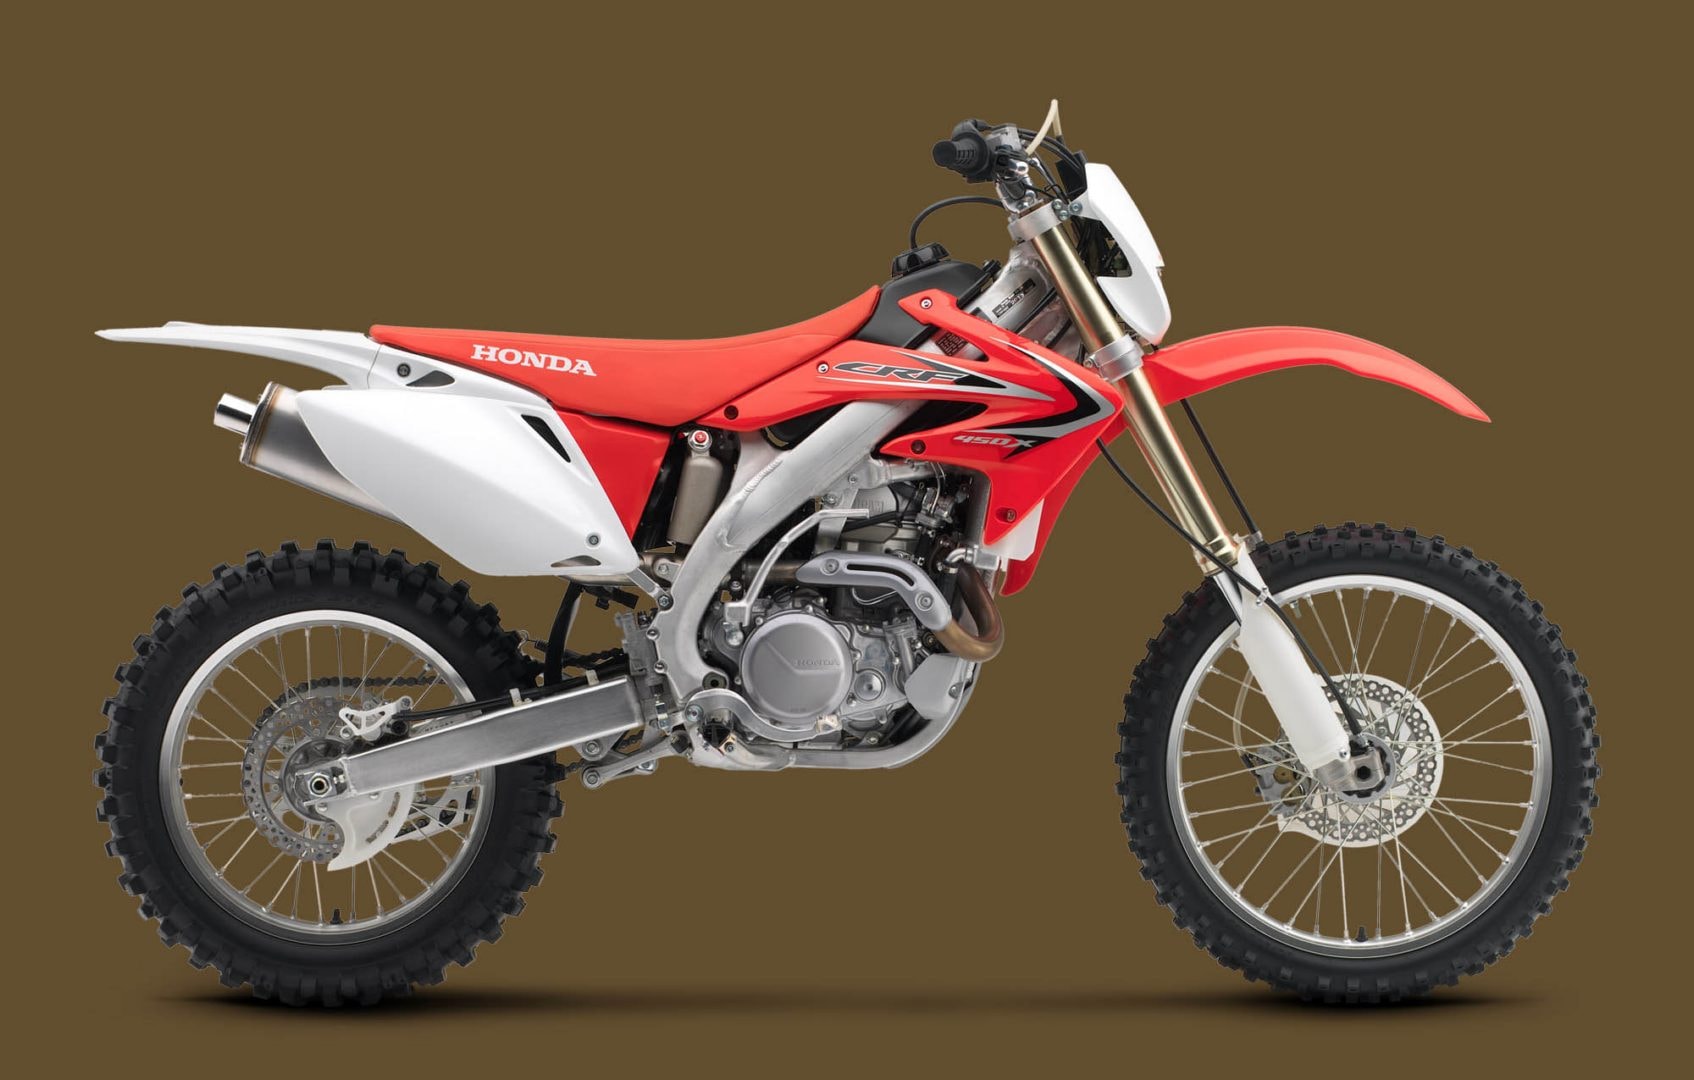 2013 Honda Crf450x Trail Bike Excellence With Motocross Heritage